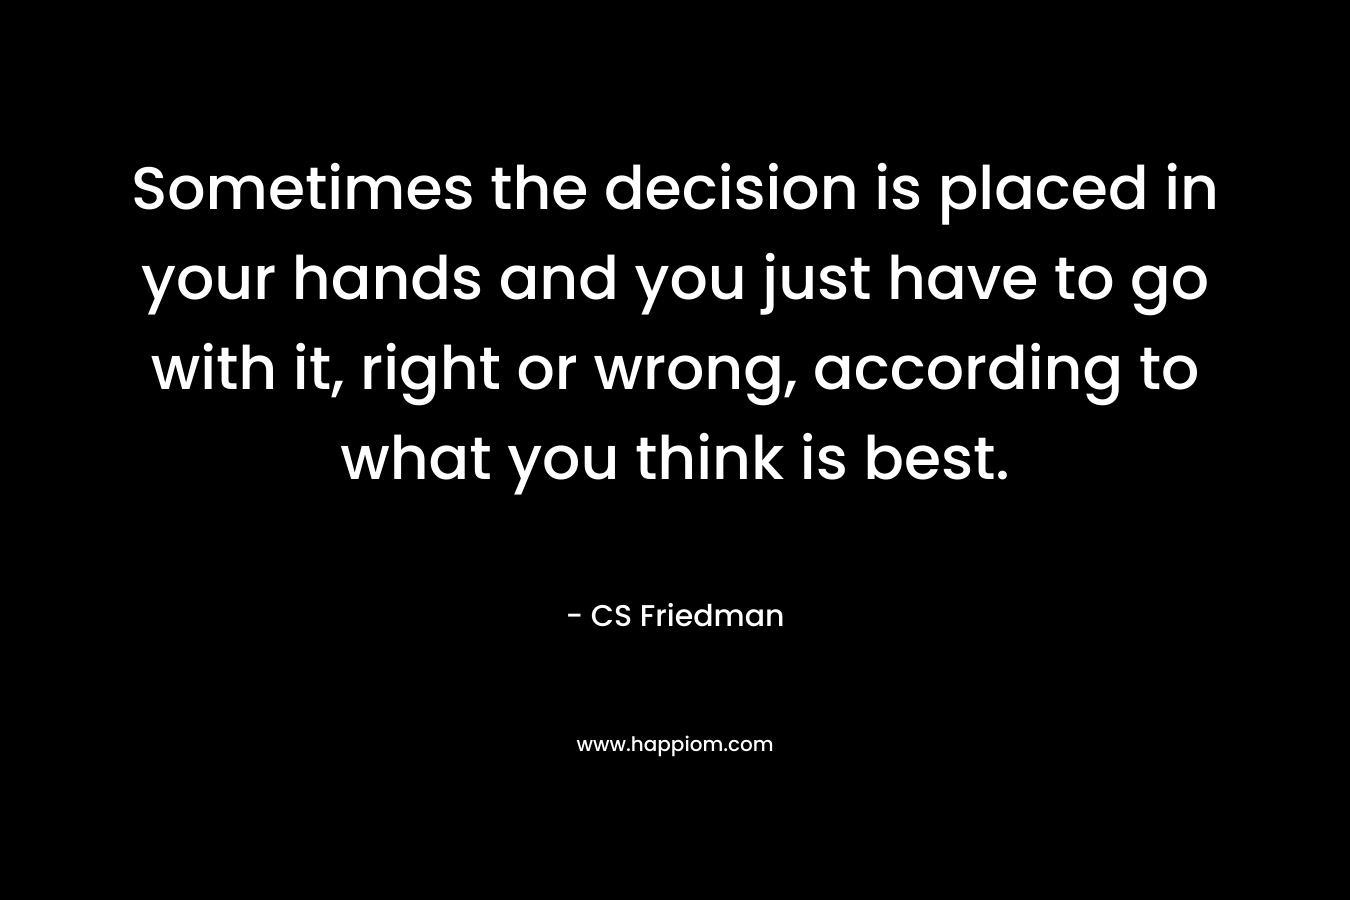 Sometimes the decision is placed in your hands and you just have to go with it, right or wrong, according to what you think is best.